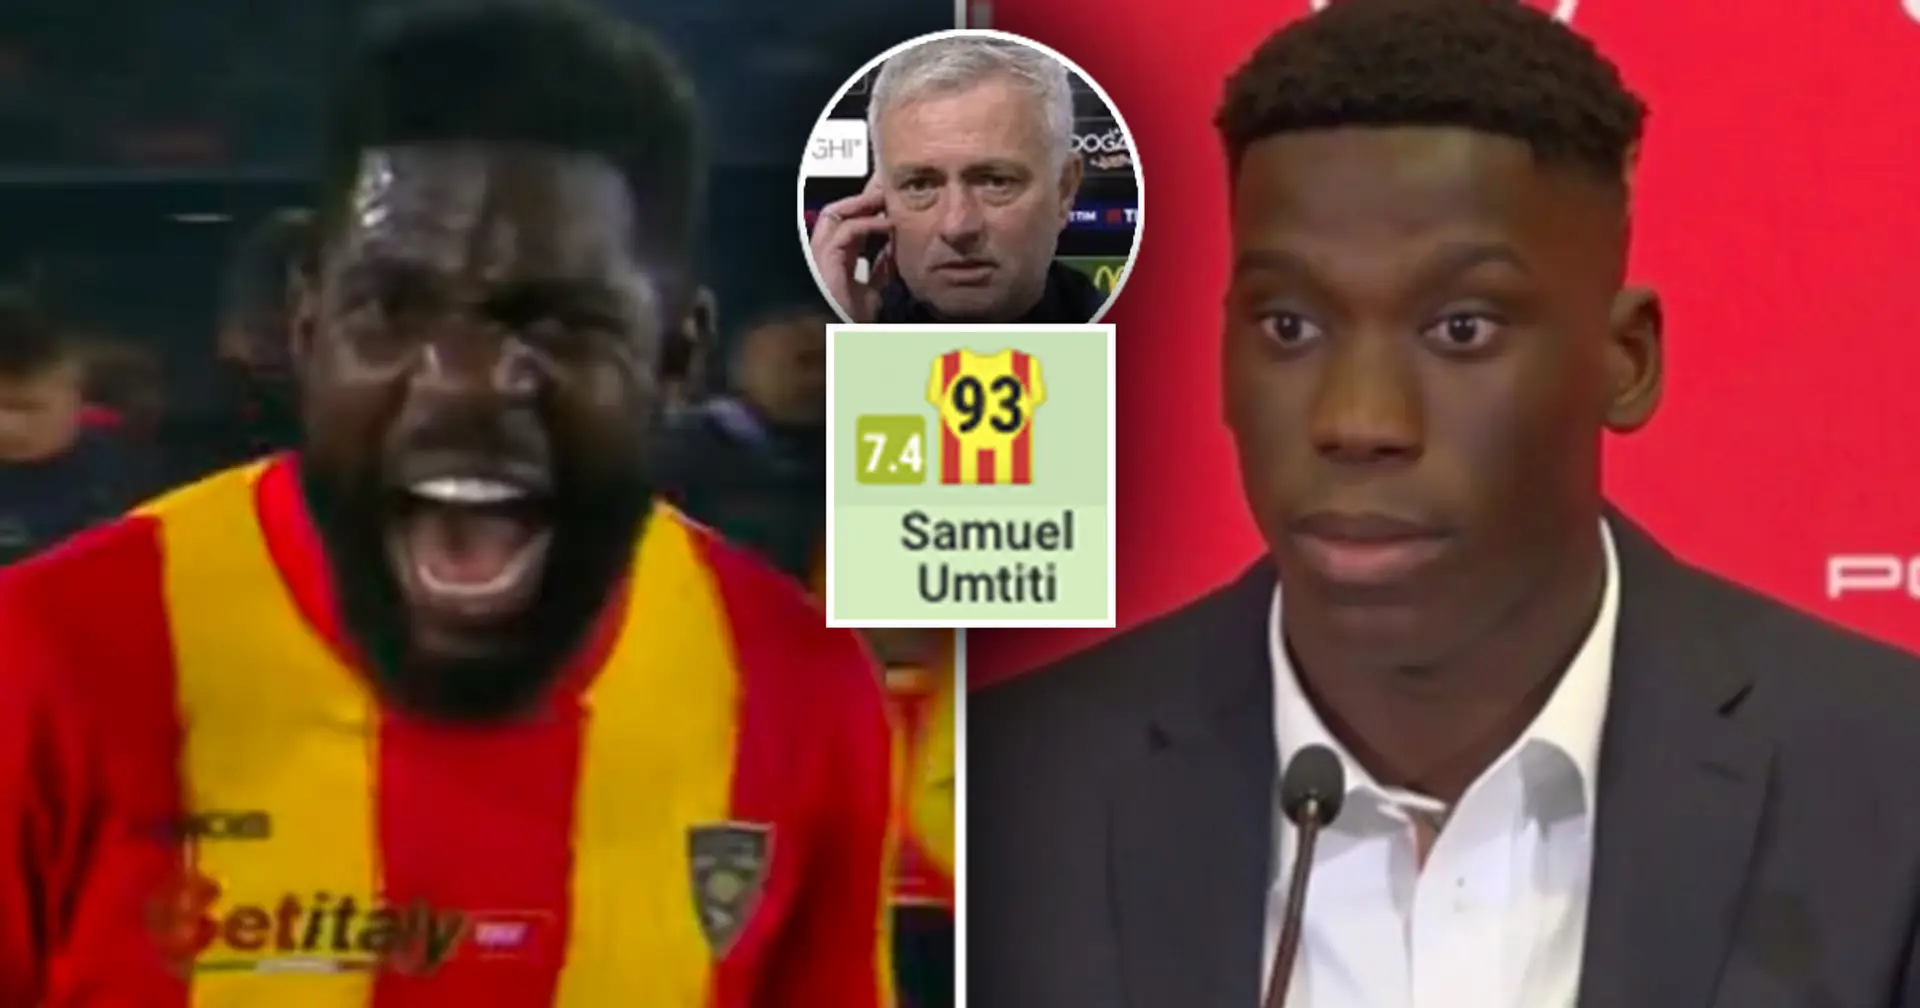 Umtiti shines as Lecce steal points from Mourinho's Roma – Ilaix Moriba reacts